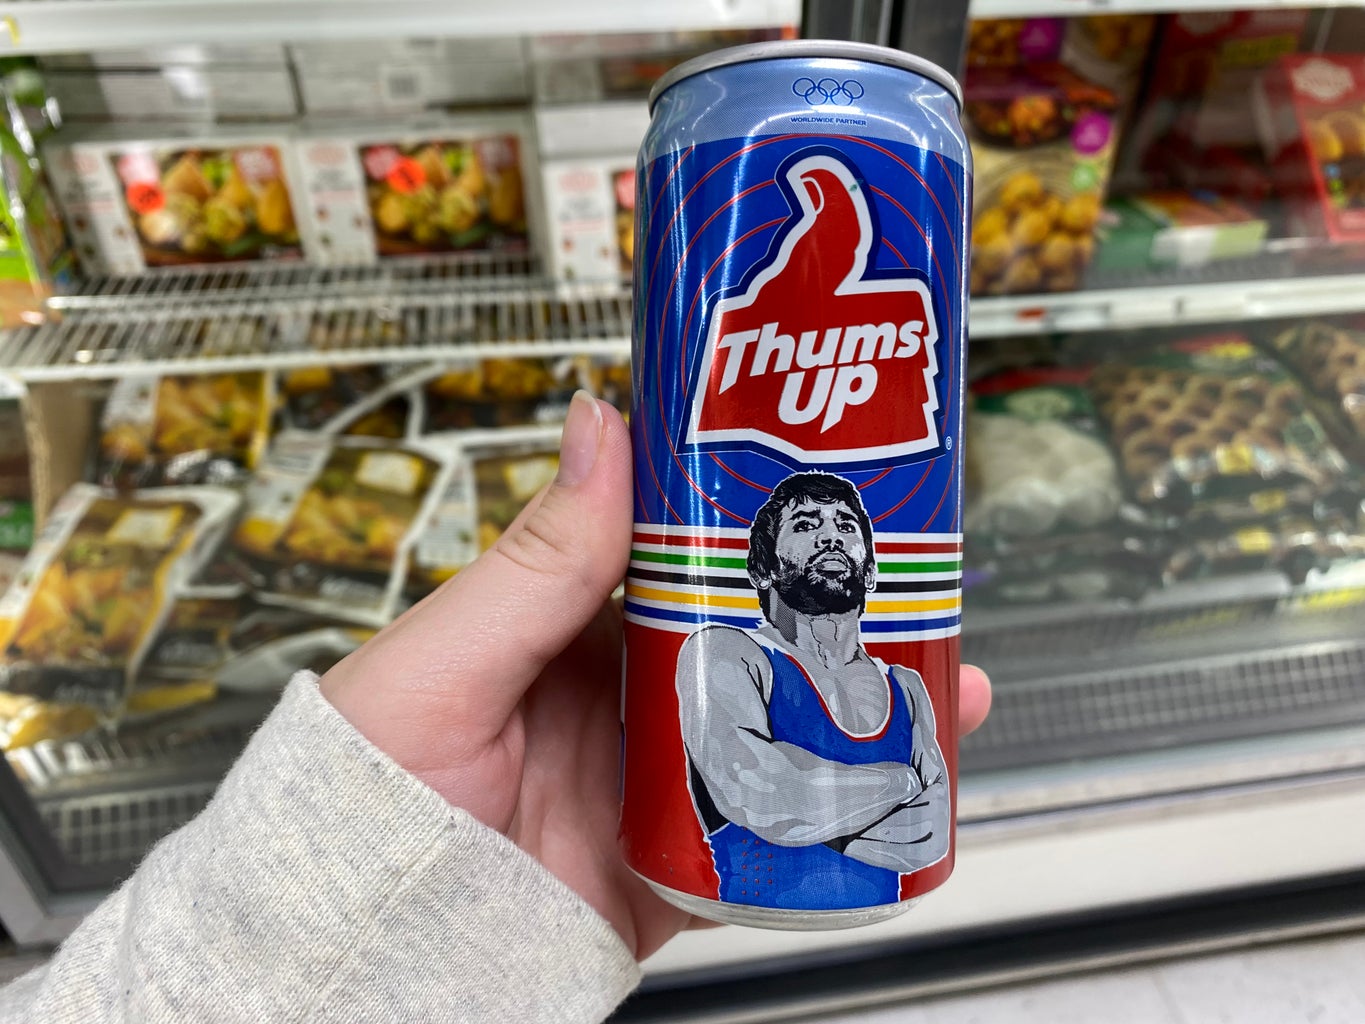 Thumbs Up drink